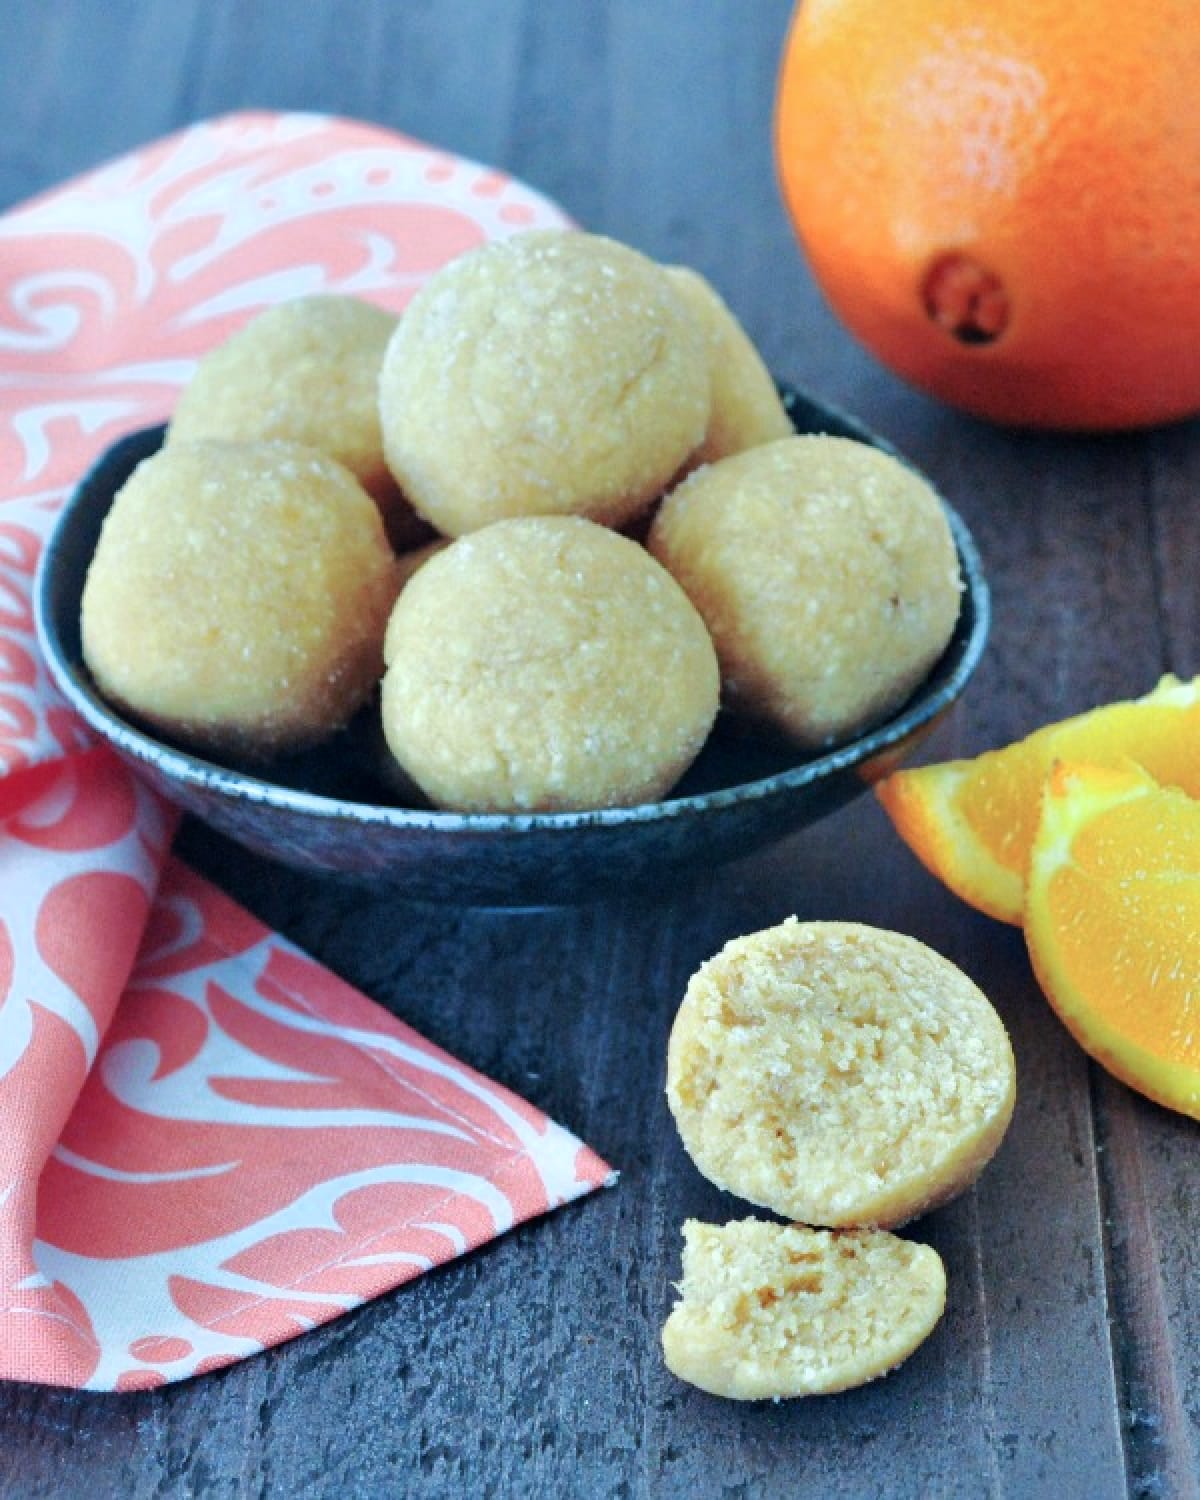 Small round orange creamsicle protein bites stacked in a rustic dark grey bowl, one bite sitting outside the bowl on a wood surface. Whole unpeeled orange and several fresh orange slices in background.